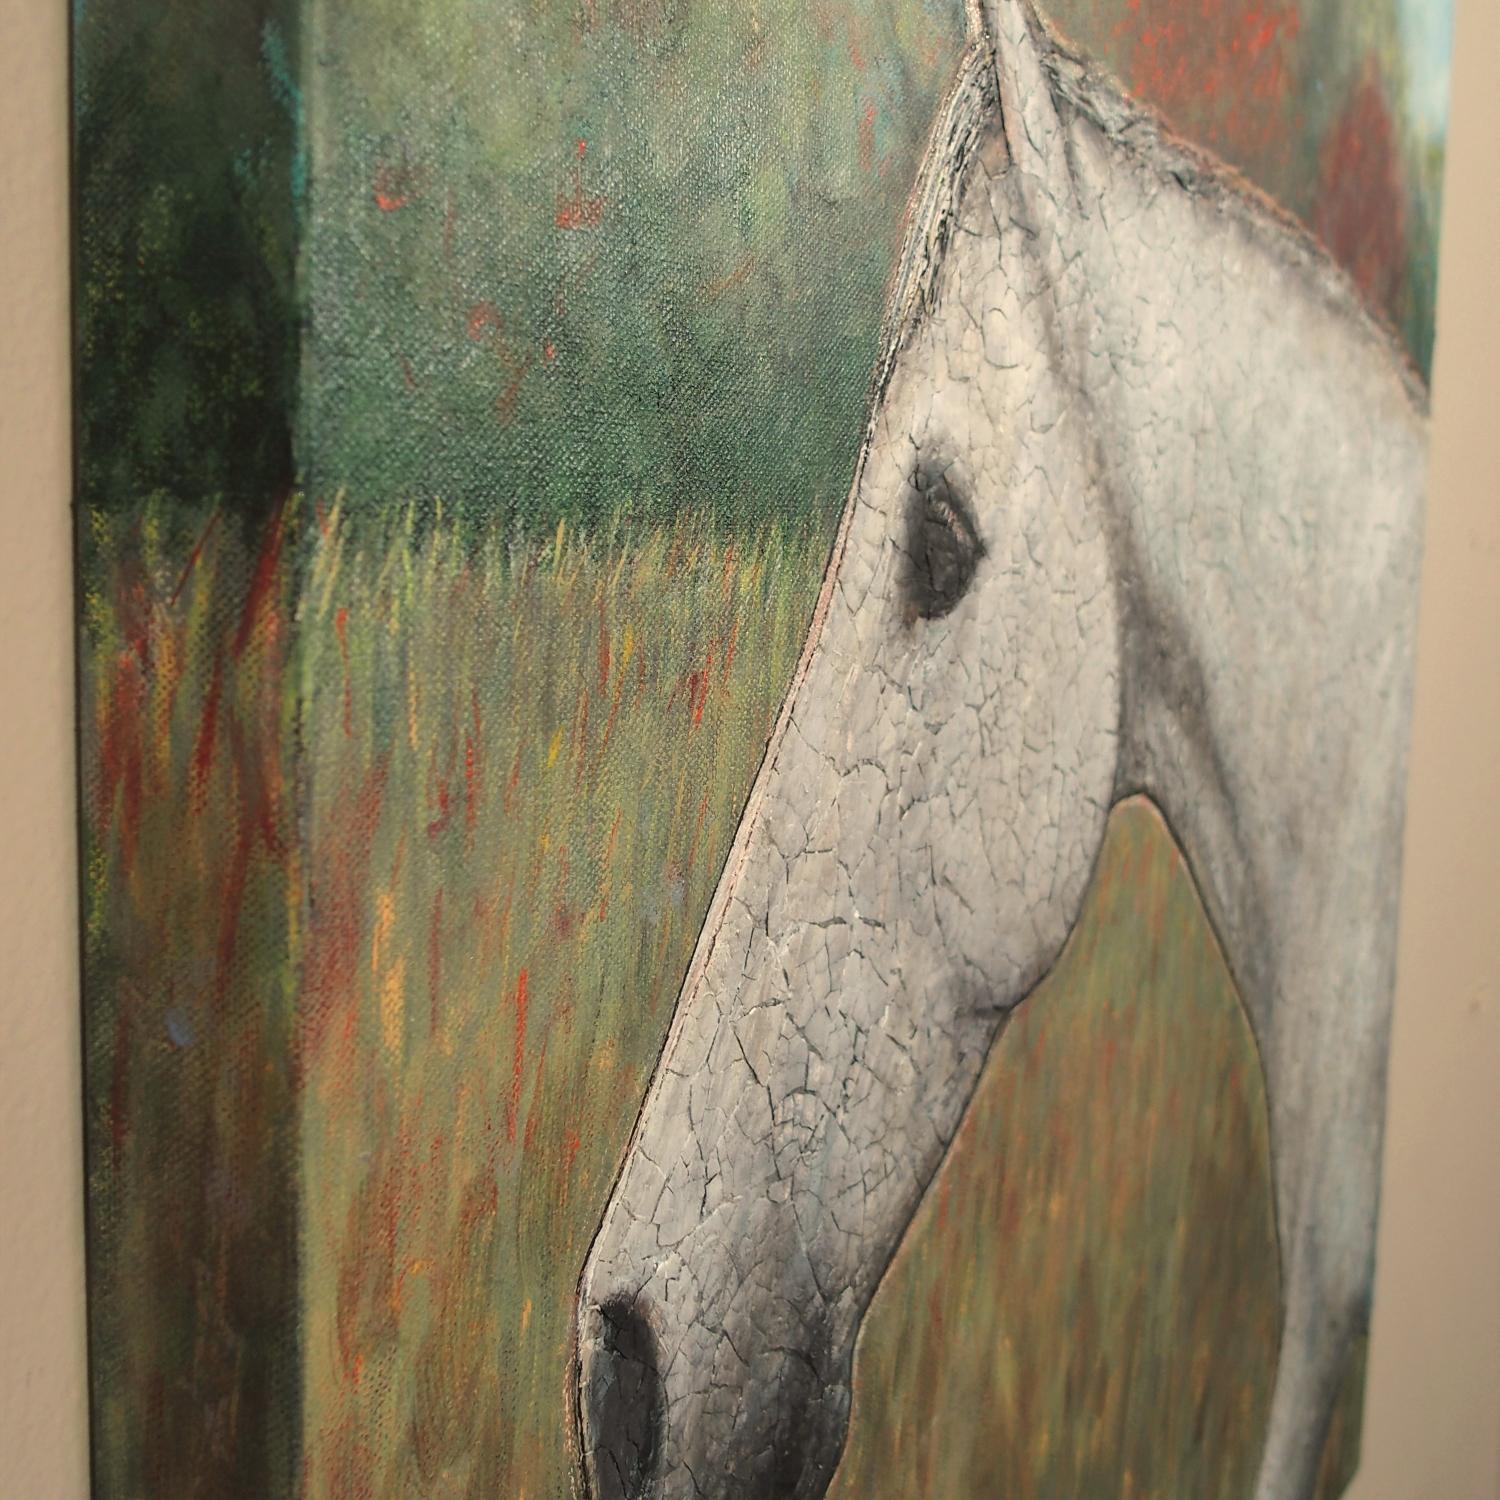 horse painting easy